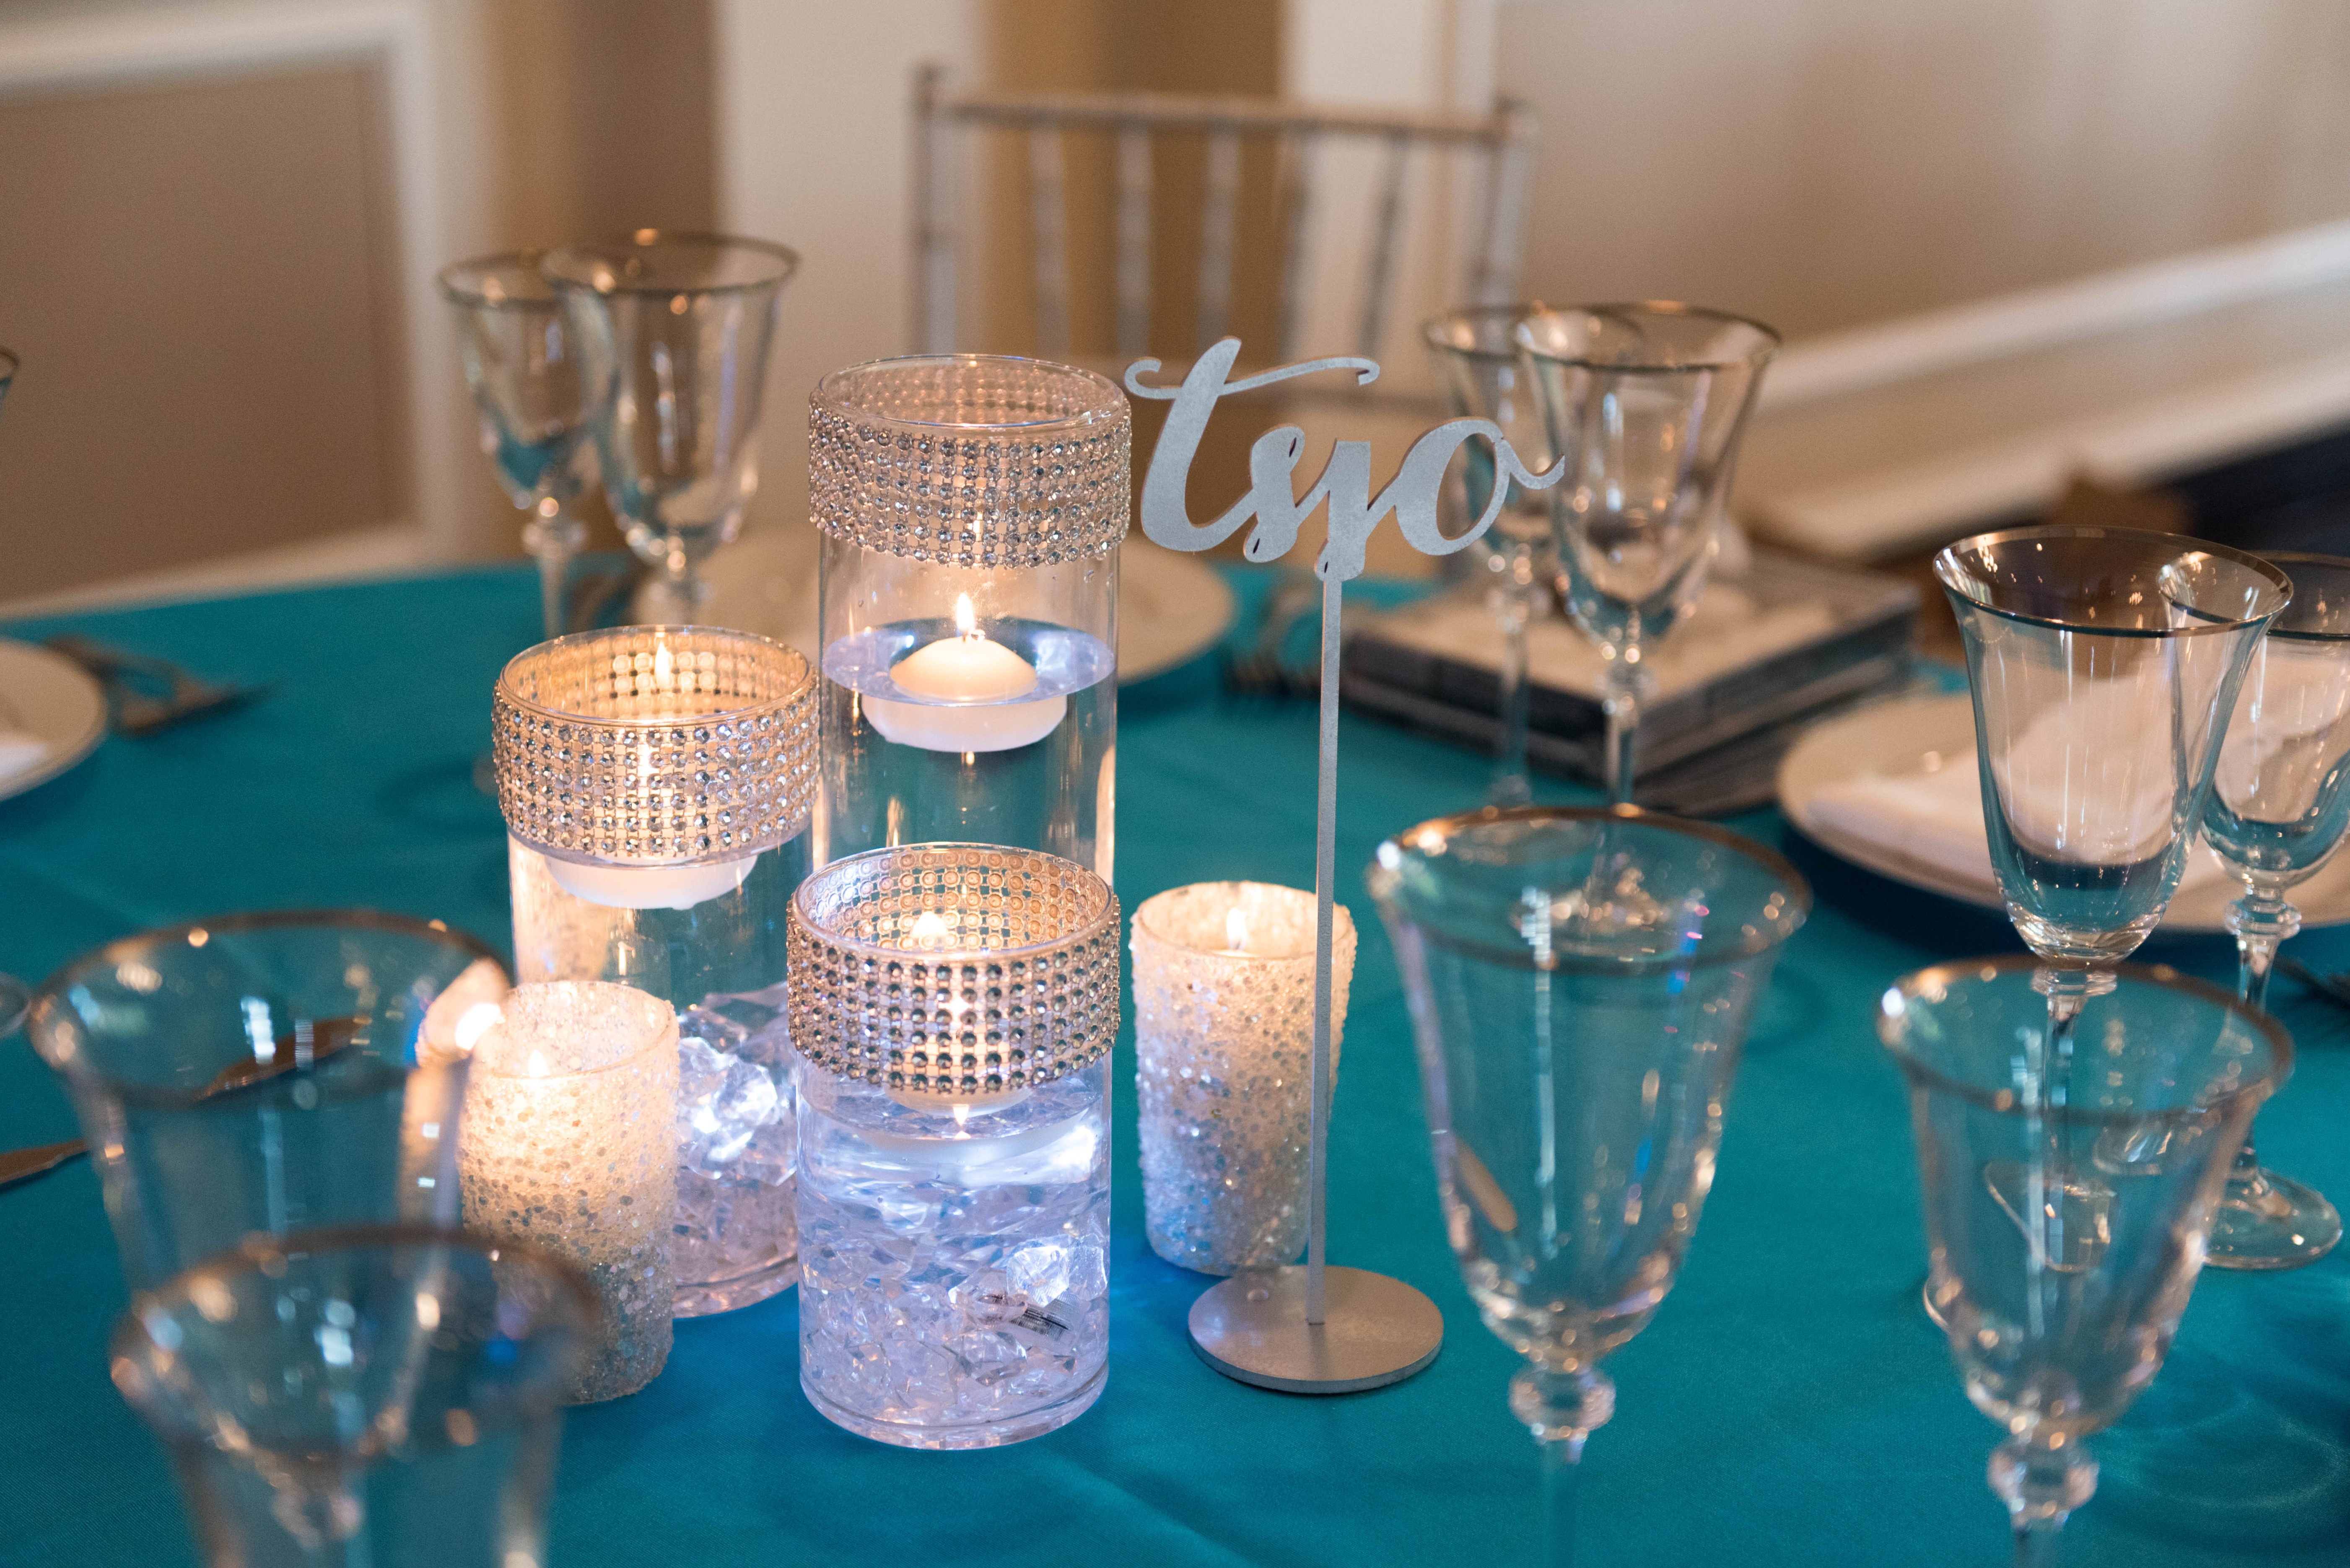 Floating candle and bling centerpieces Shoshana's blue and silver sparkle Bat Mitzvah party at Rock Creek Mansion in Bethesda. | Pop Color Events | Adding a Pop of Color to Bar & Bat Mitzvahs in MD, DC & VA. | Photo by A La Mode Photography